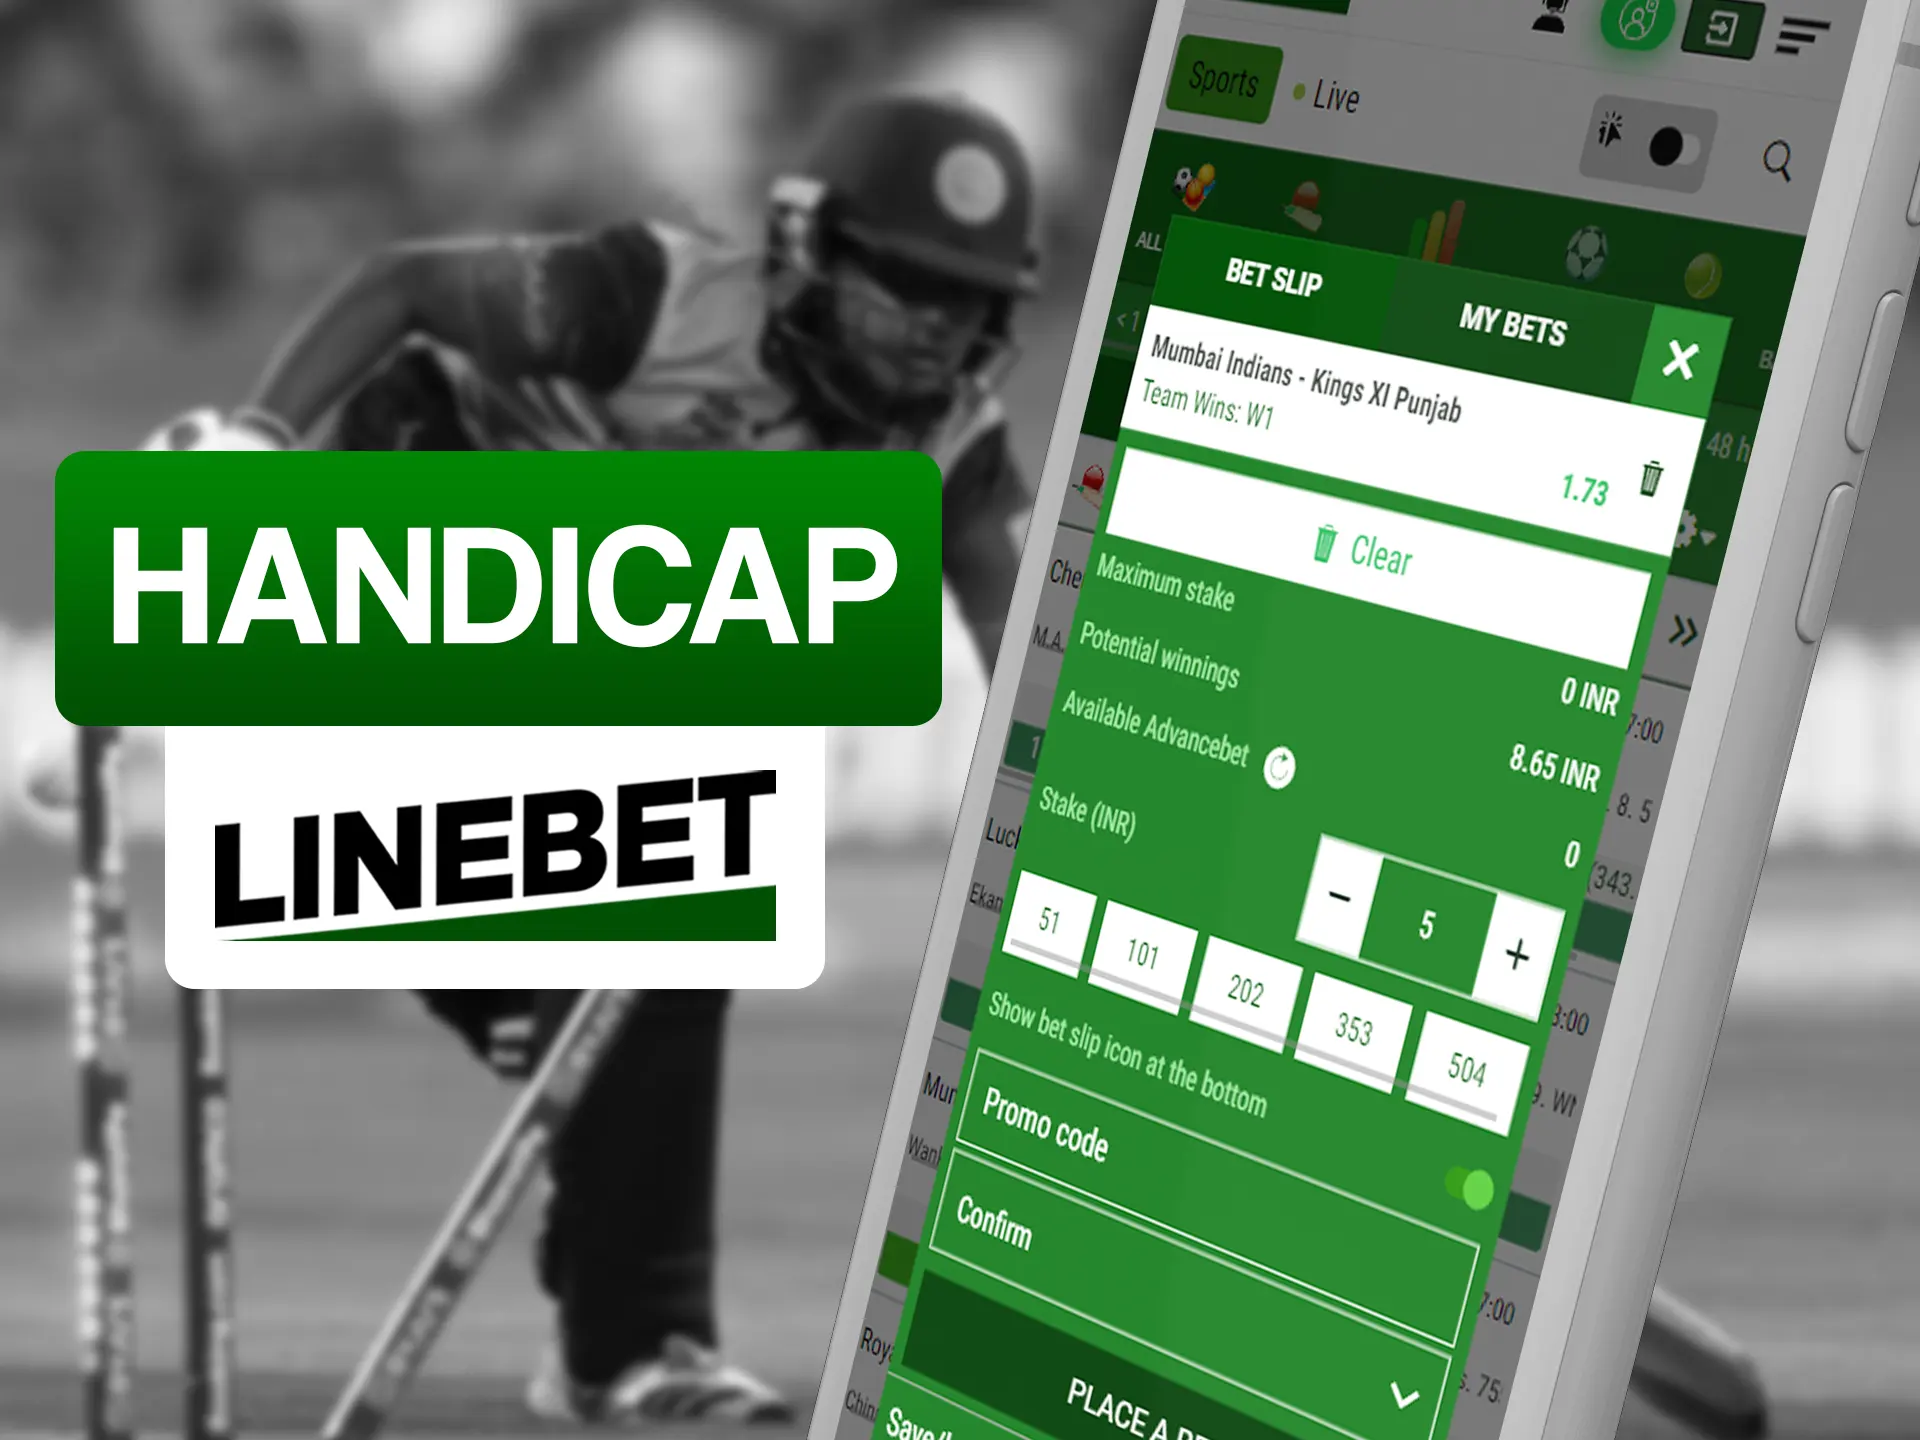 Make bet on winning team and win with Linebet app.